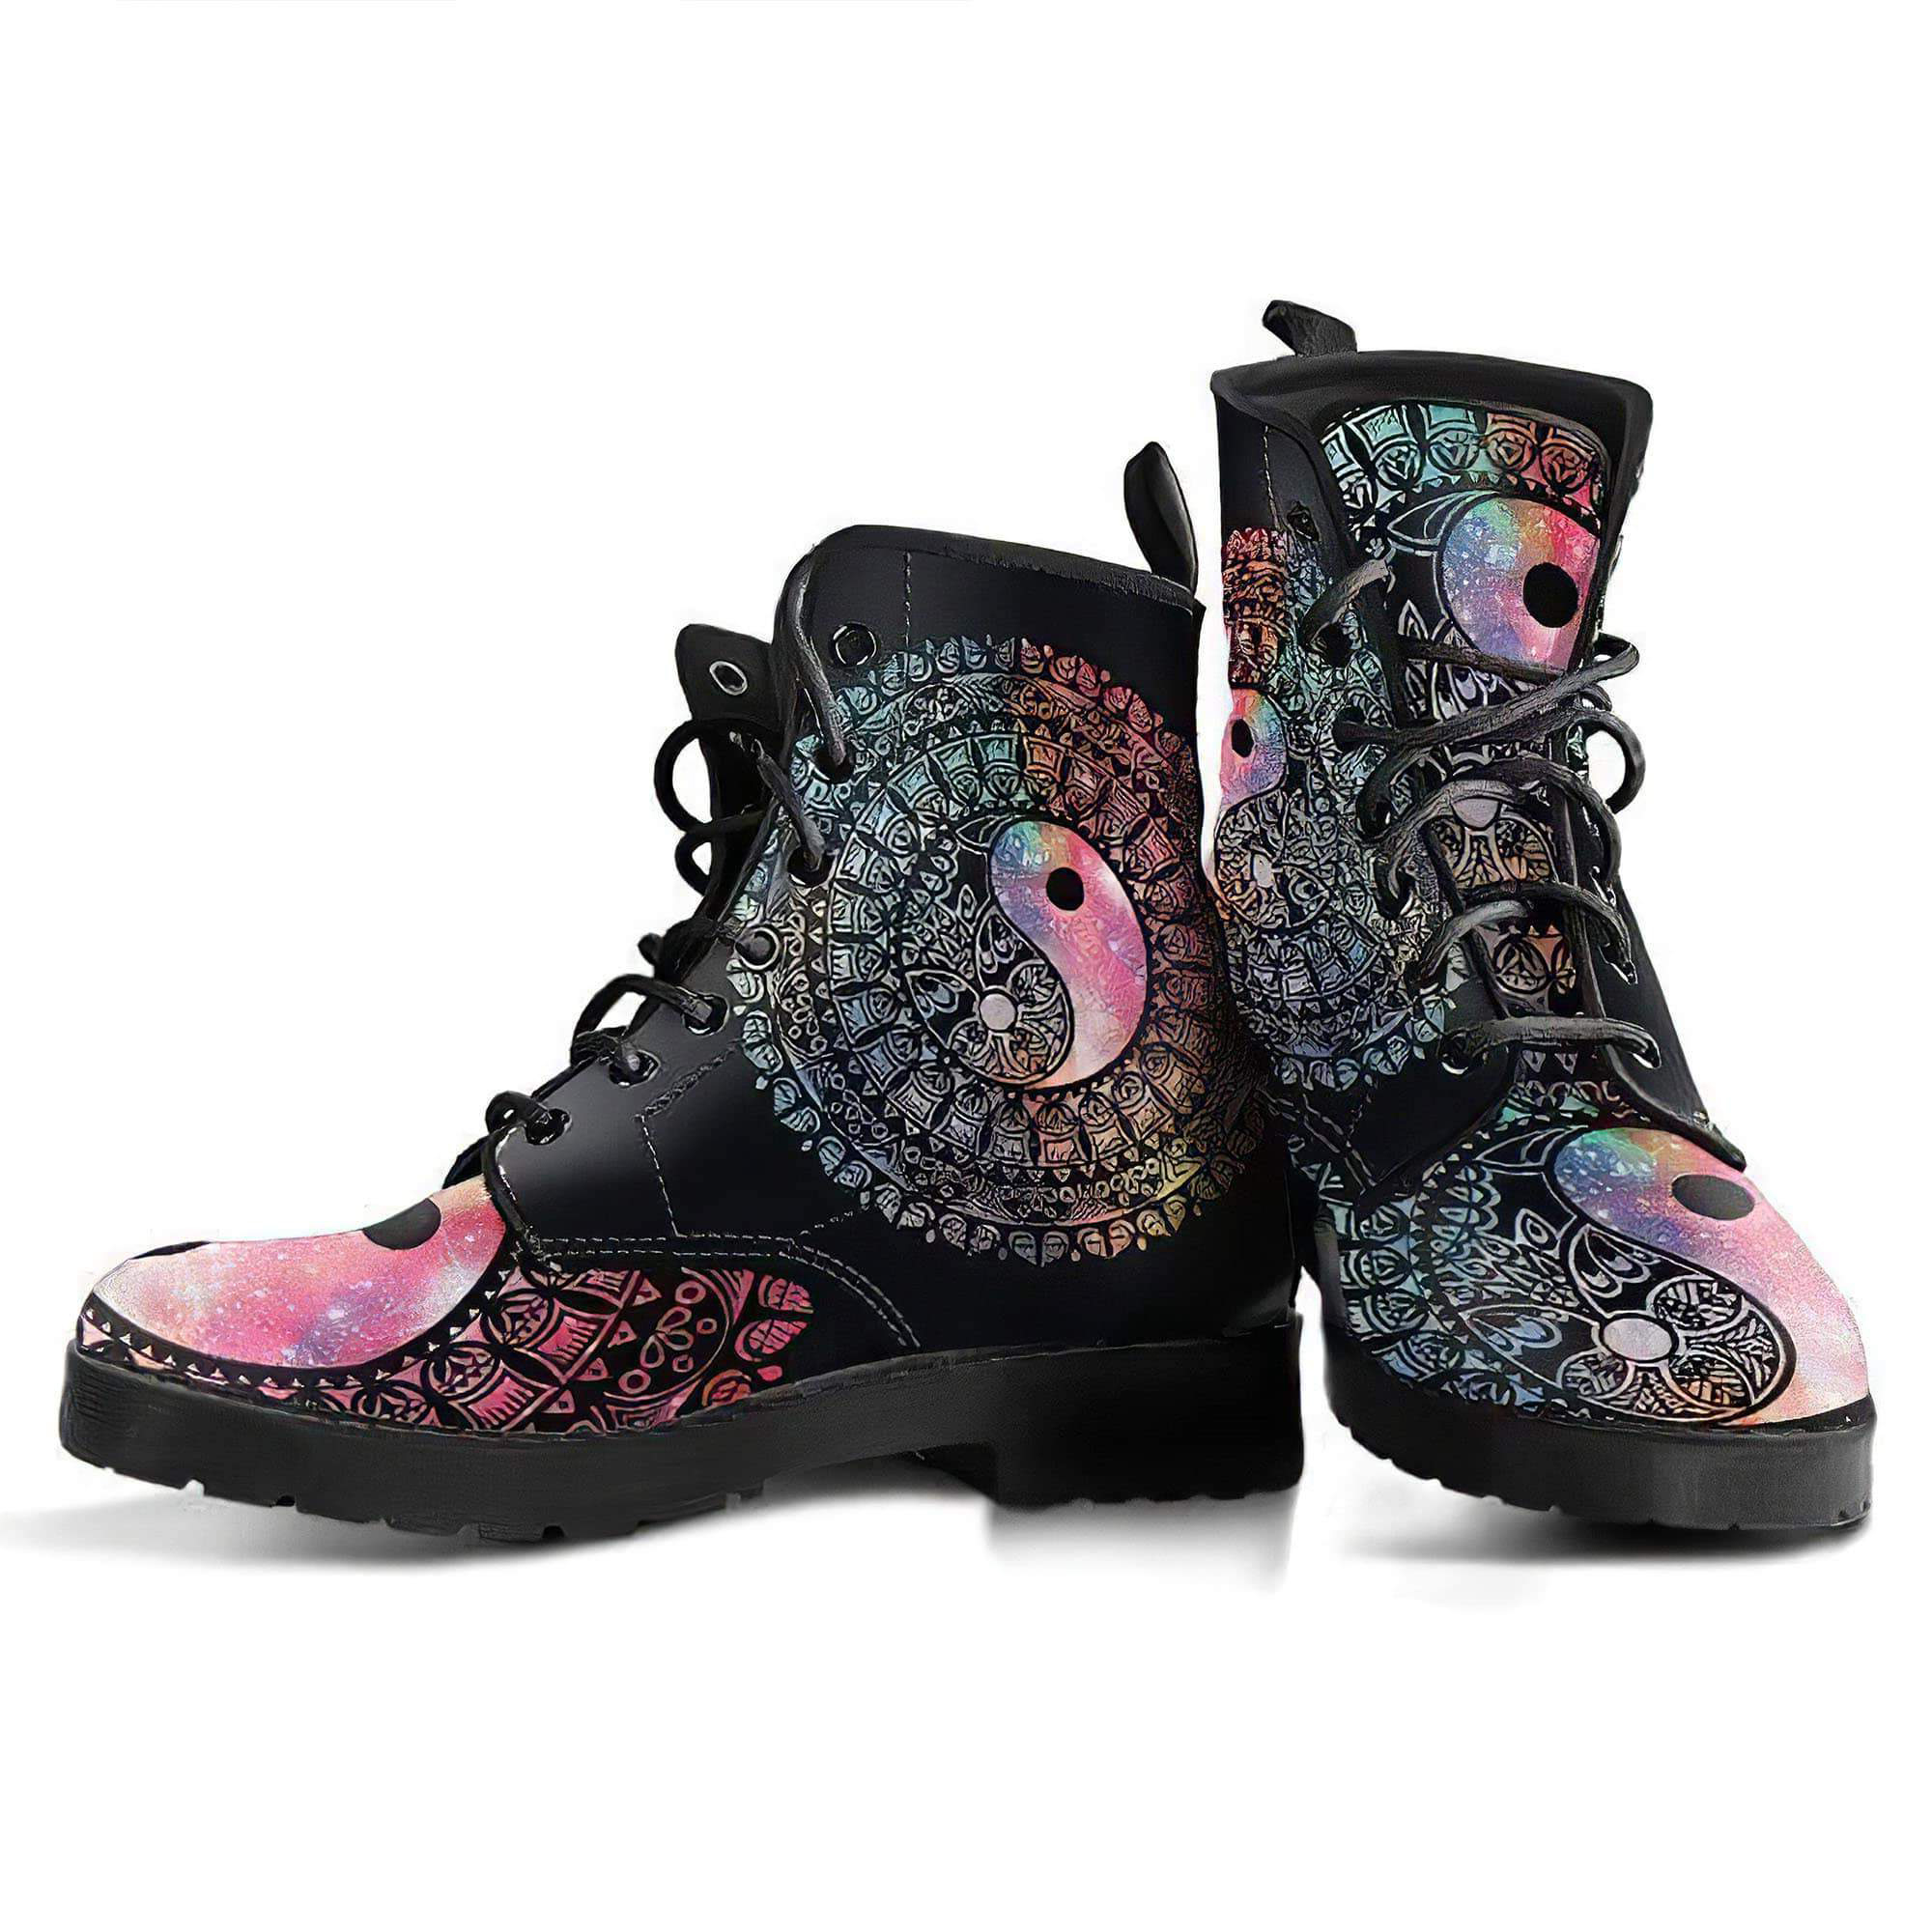 yinyang-mandala-3-handcrafted-boots-women-s-leather-boots-12051982811197.jpg